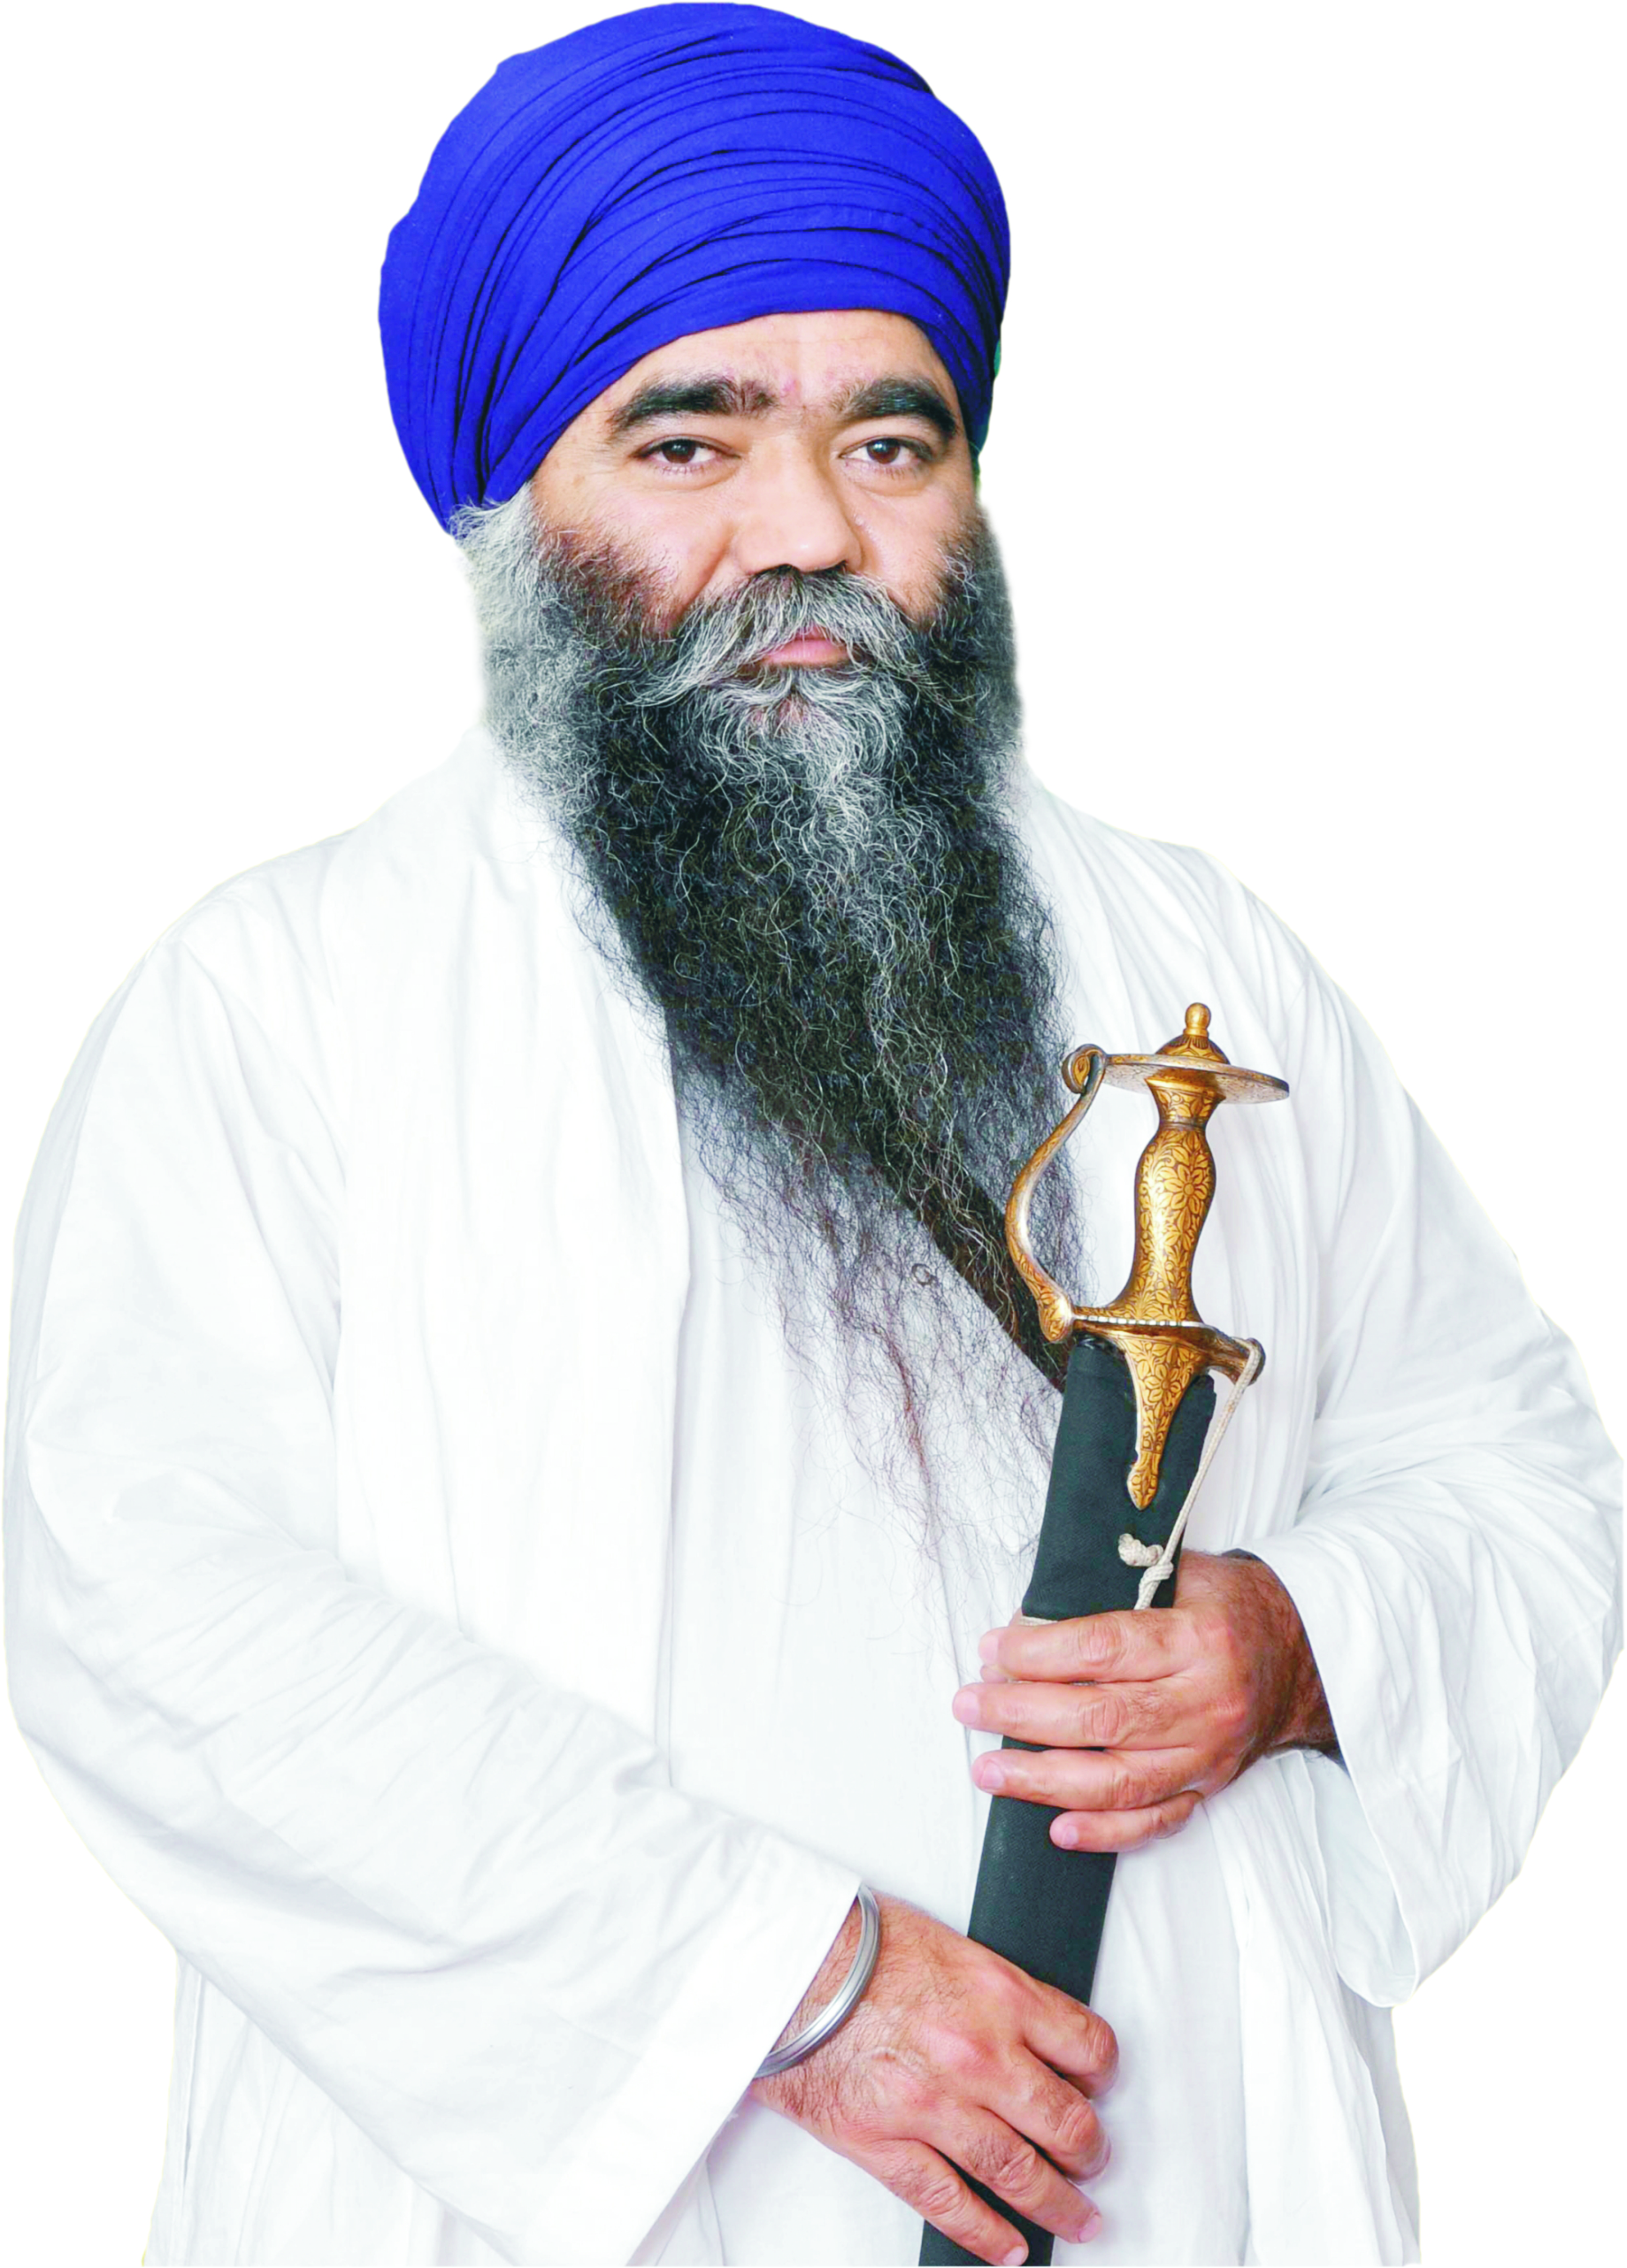 Dumdumi Tuxal advocated the ancient practice of jointly celebrating Gurpurab and Panthic days.